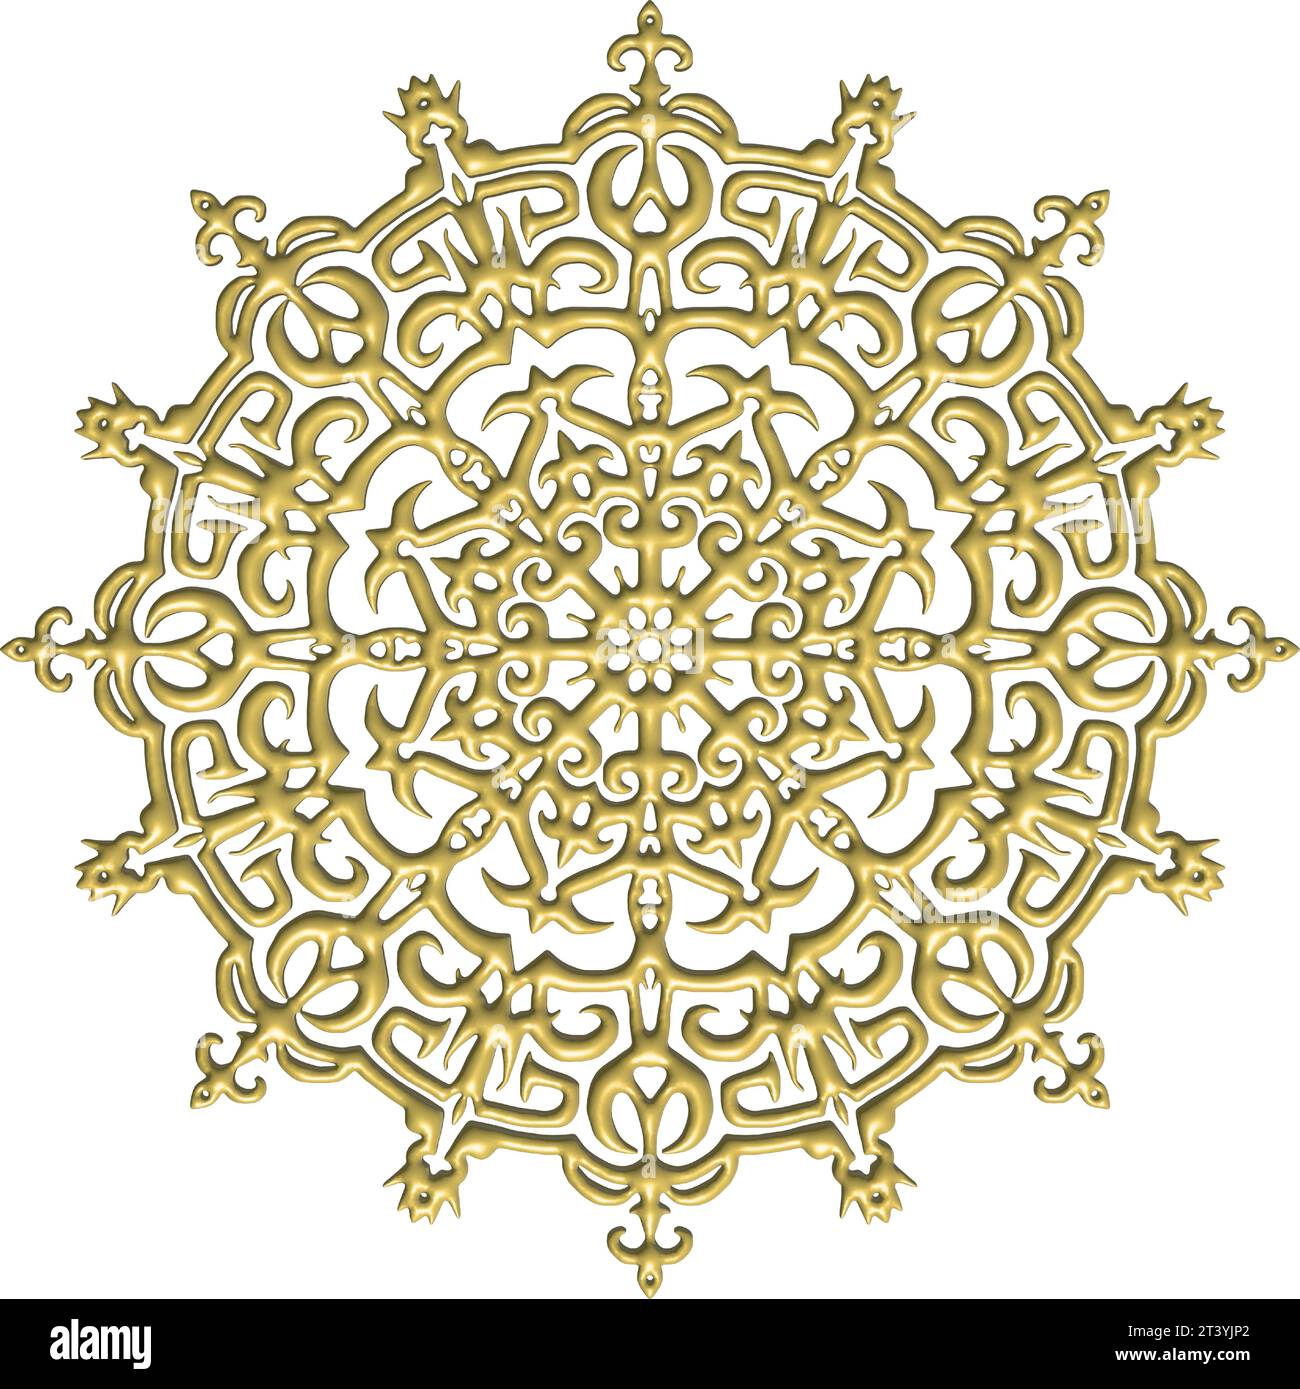 Intricate gothic architecture in 3D, adorned with detailed designs, illuminated with radiant gold, and intricate vegetative patterns Stock Vector